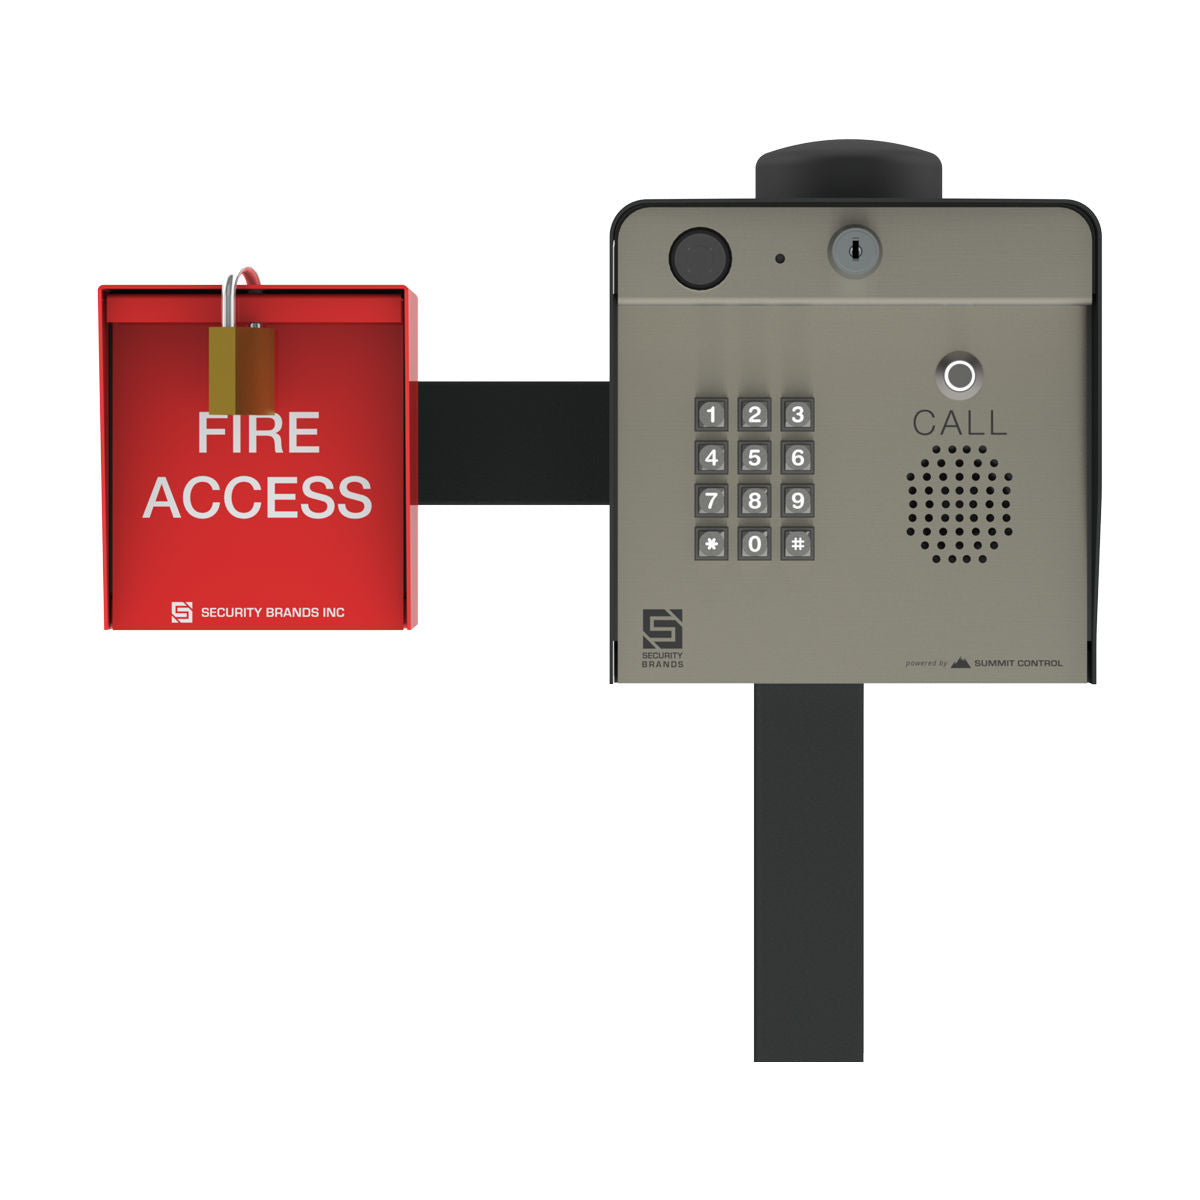 Security Brands 18-A01 shown with an intercom and fire access box